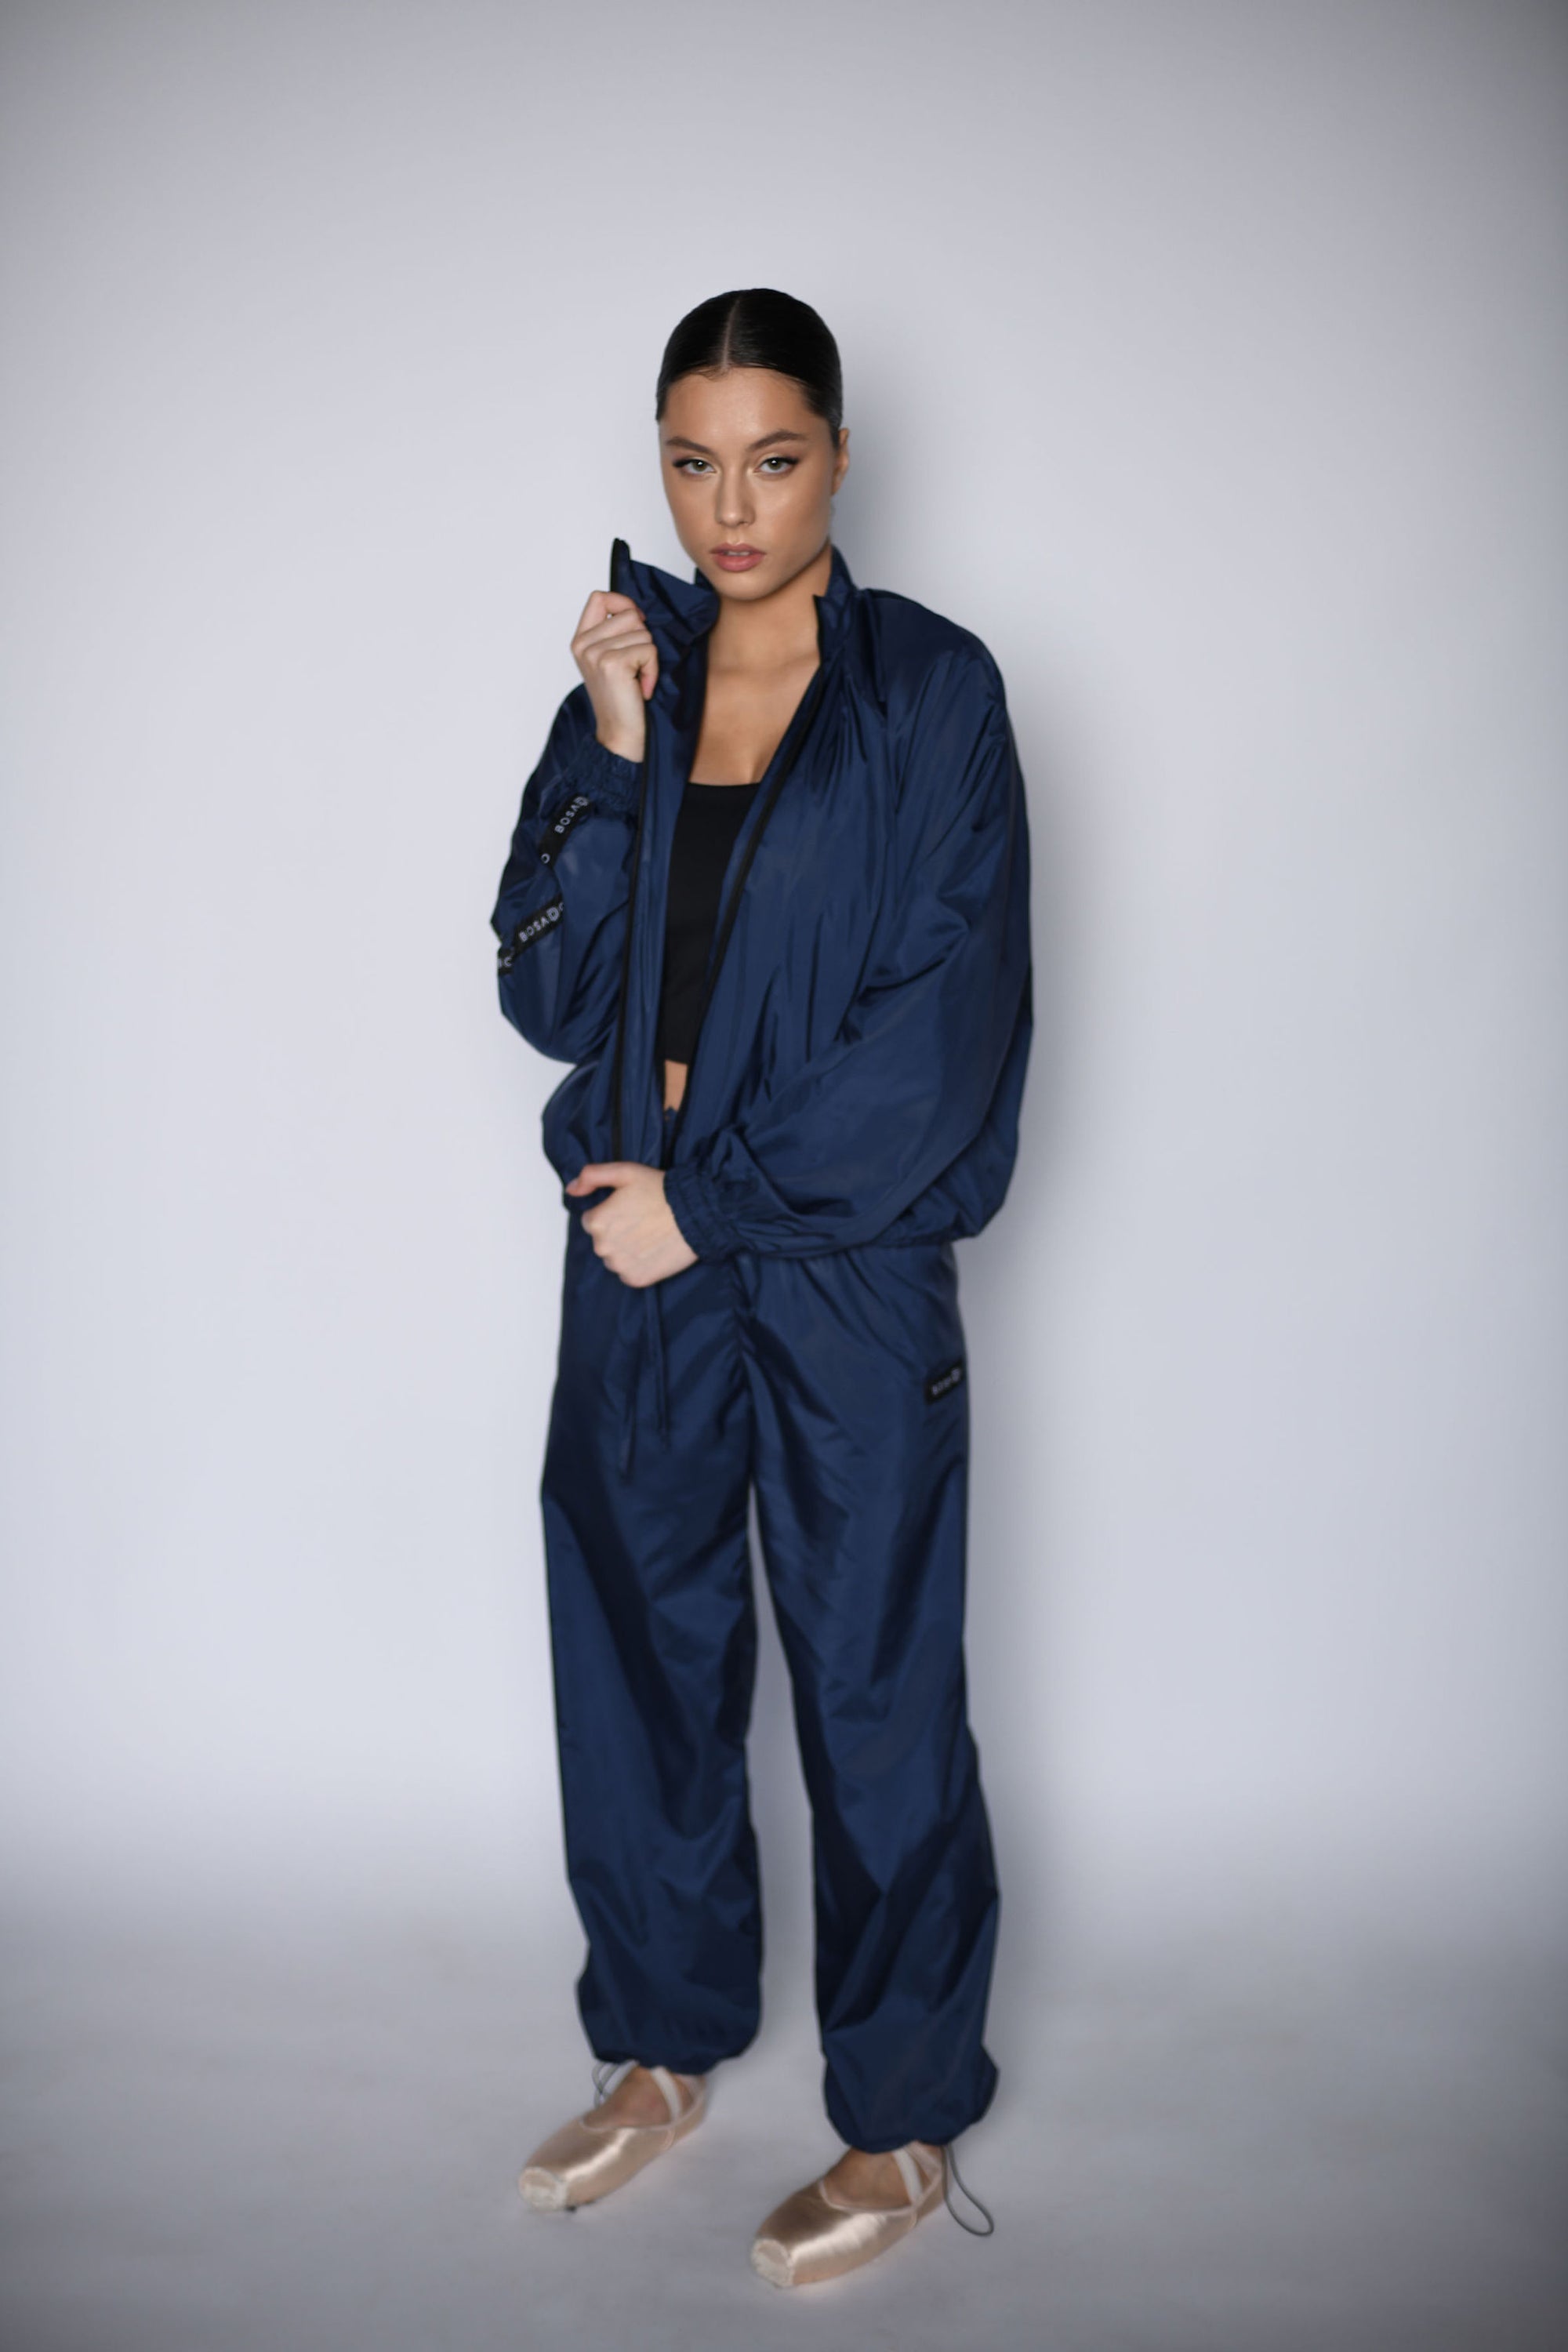 NEW URBAN SWAN COLLECTION S/S 23 | Royal blue sports suit with pants